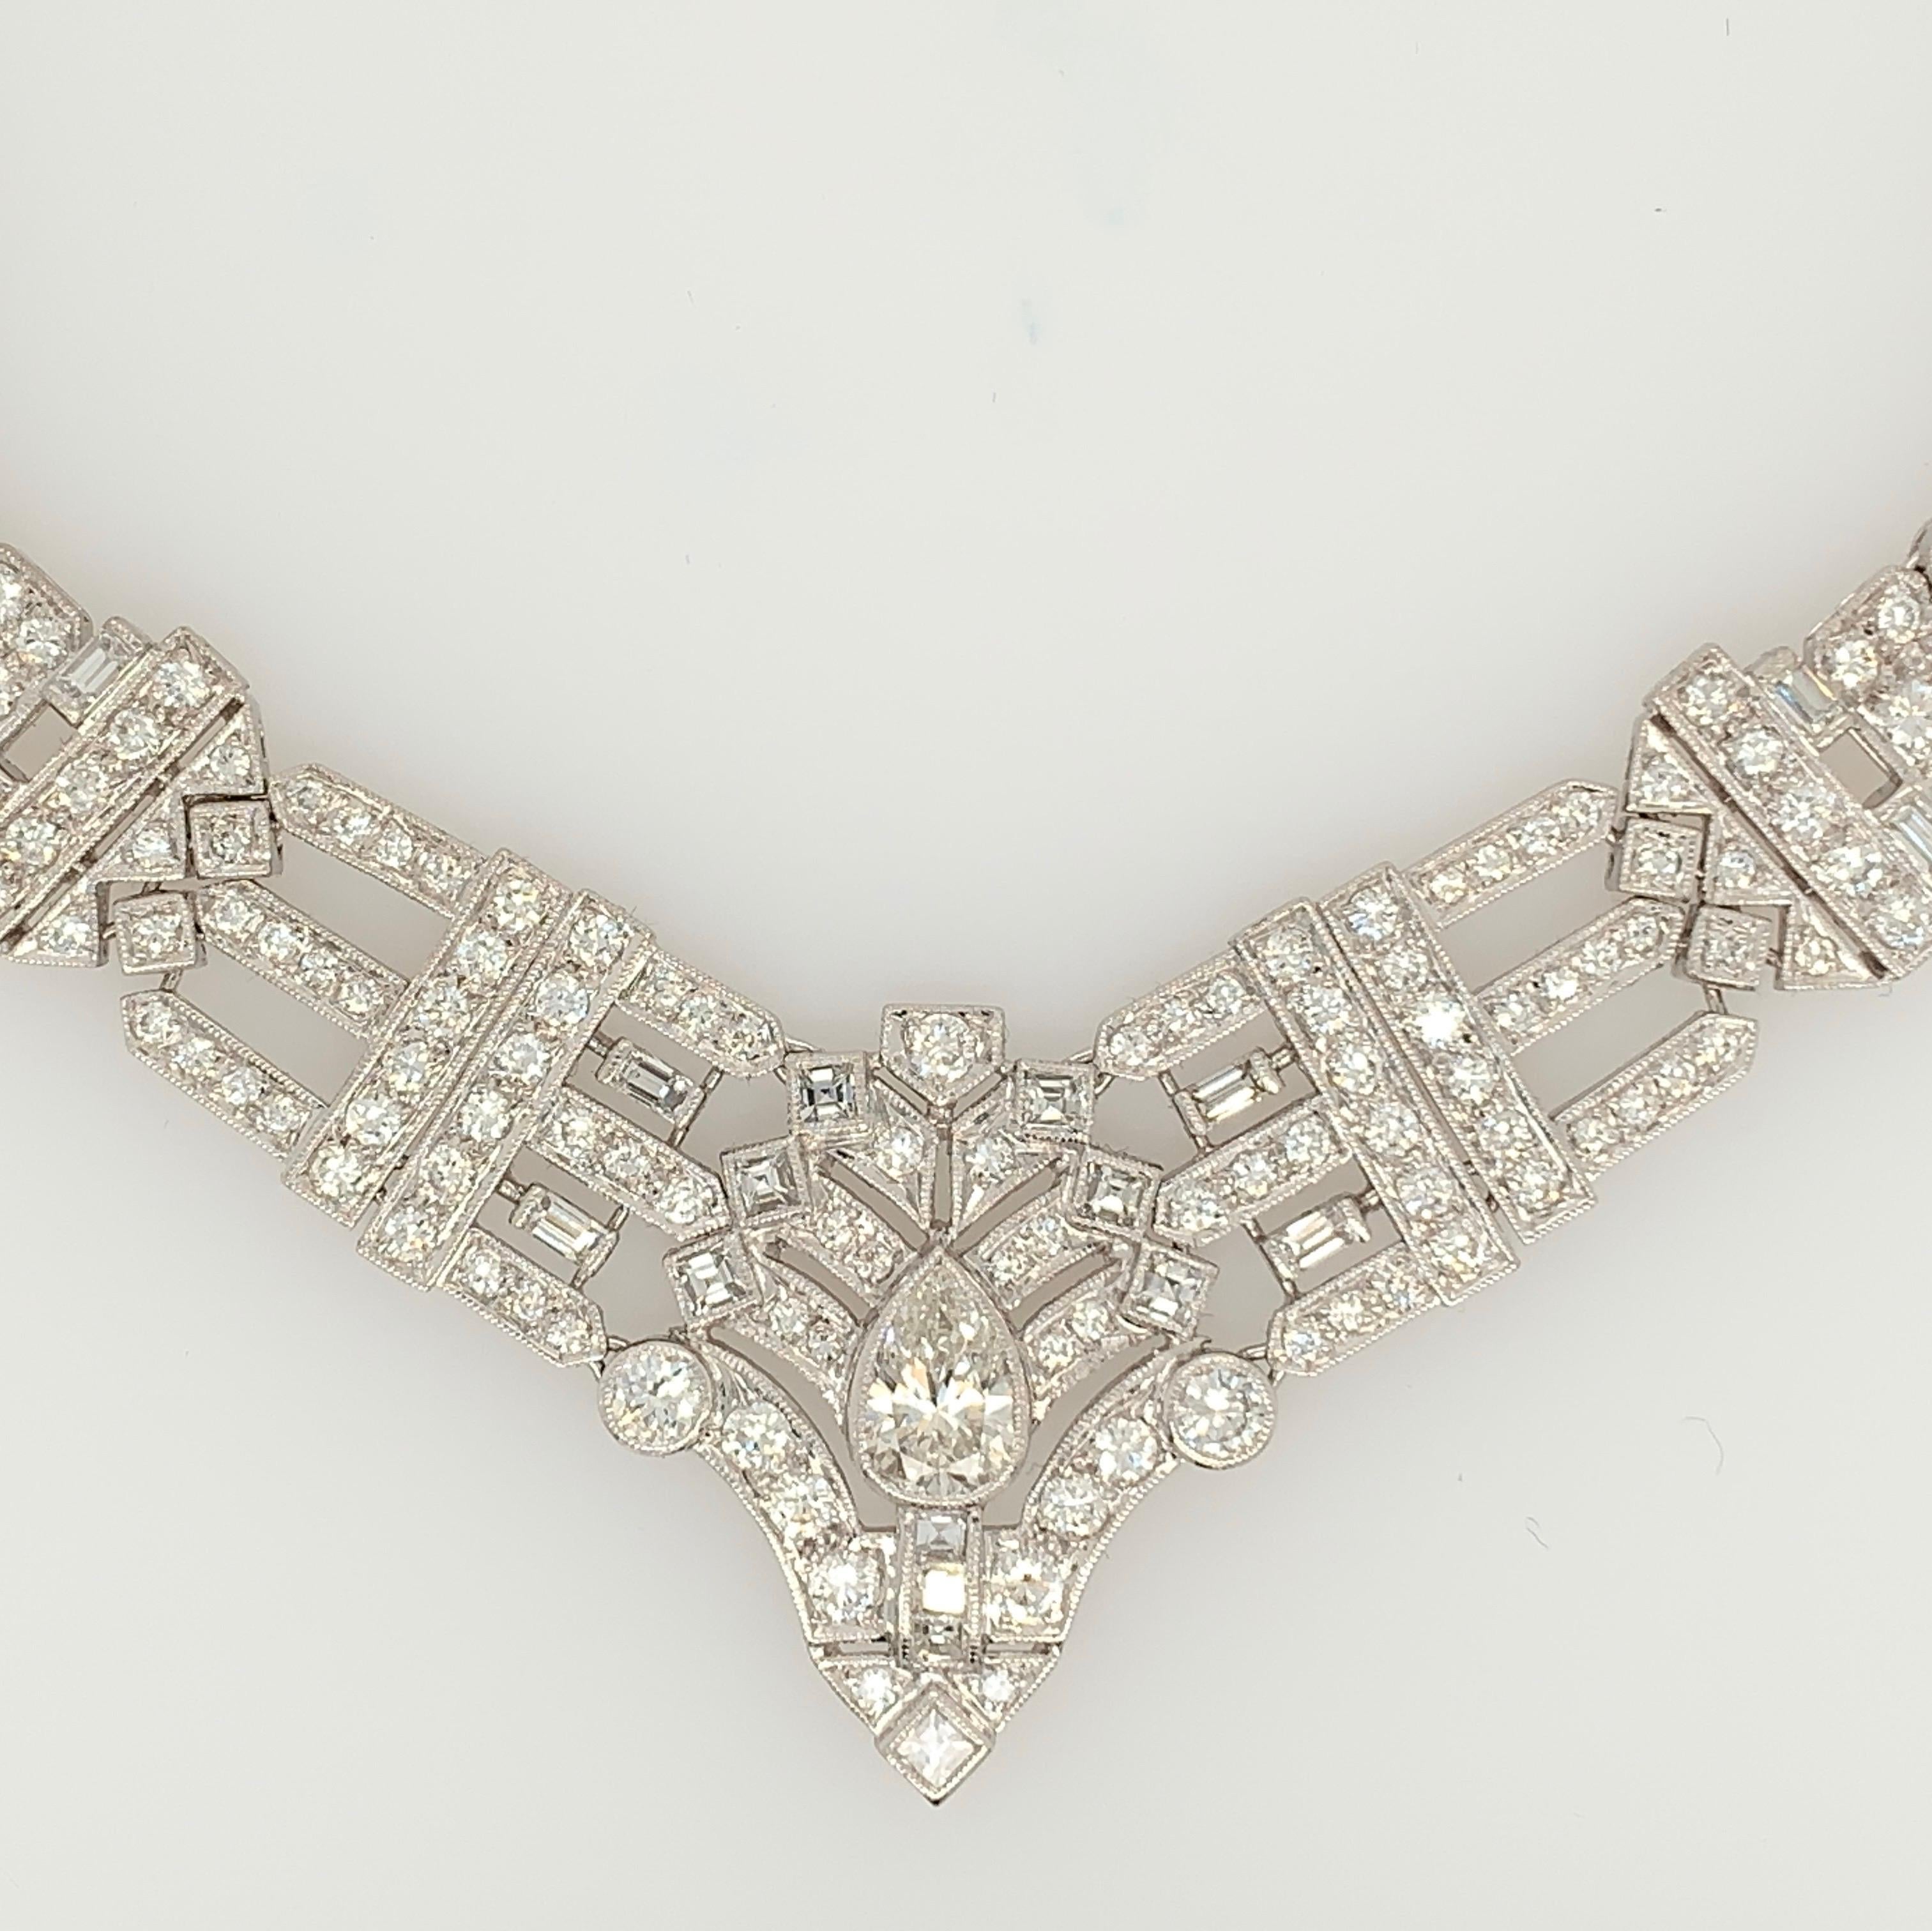 Women's Retro Gold 8 Carat GIA Certified Natural Rbc & Pear Diamond Necklace circa 1970 For Sale